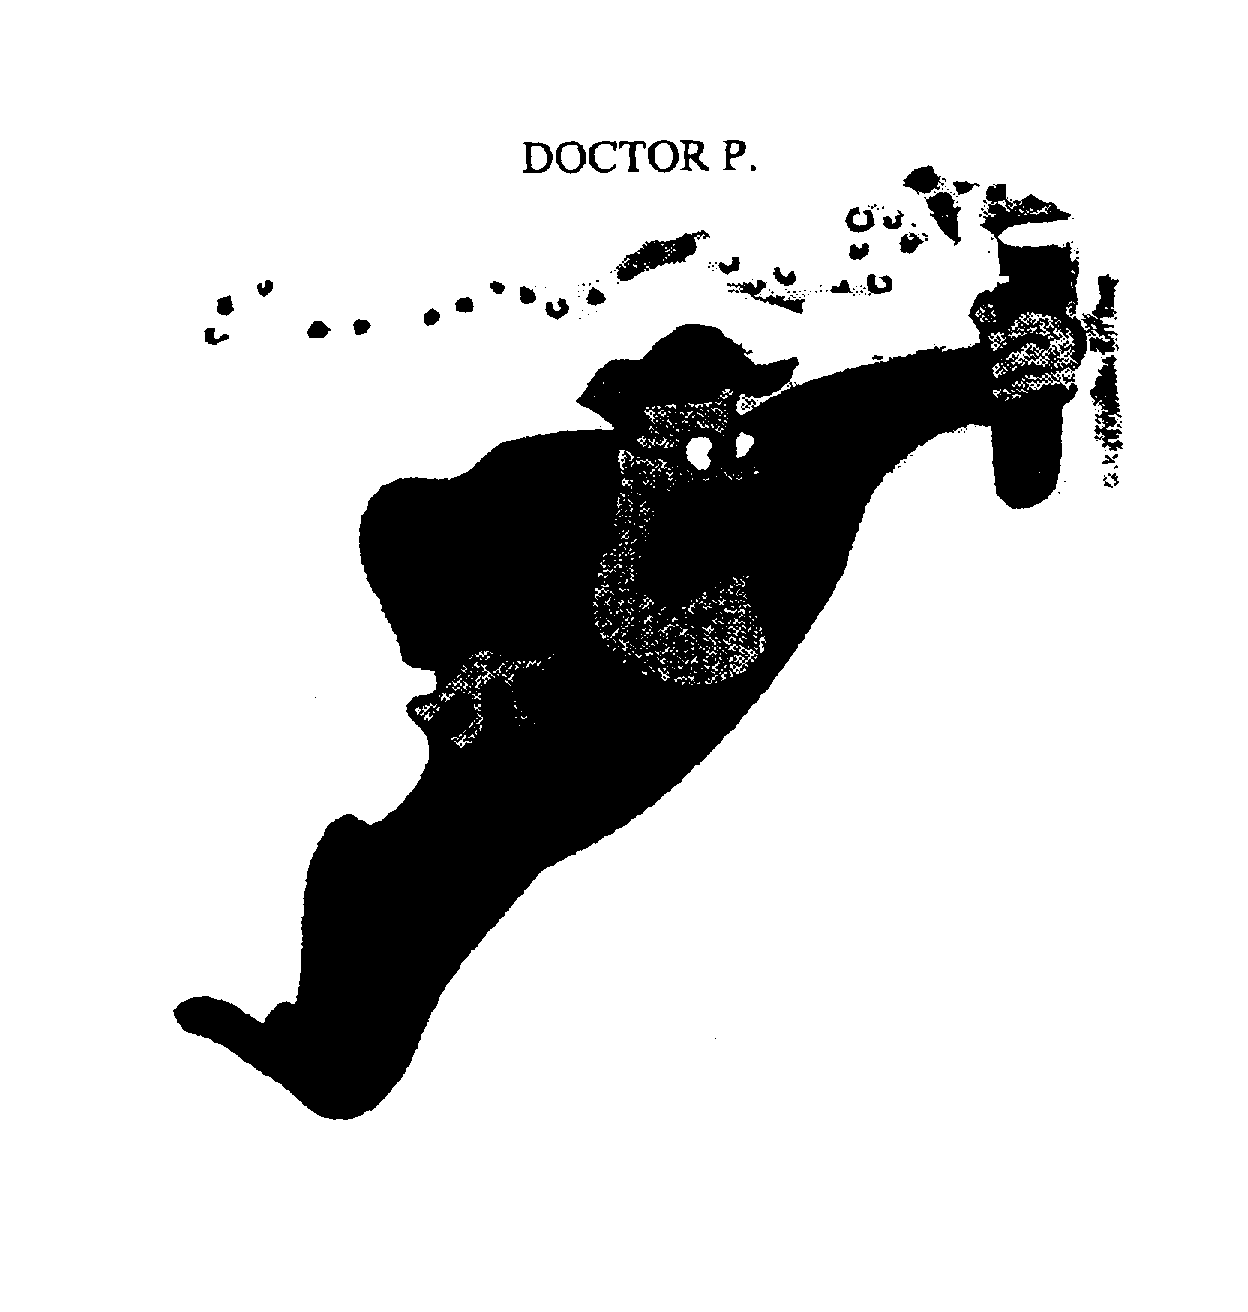  DOCTOR P